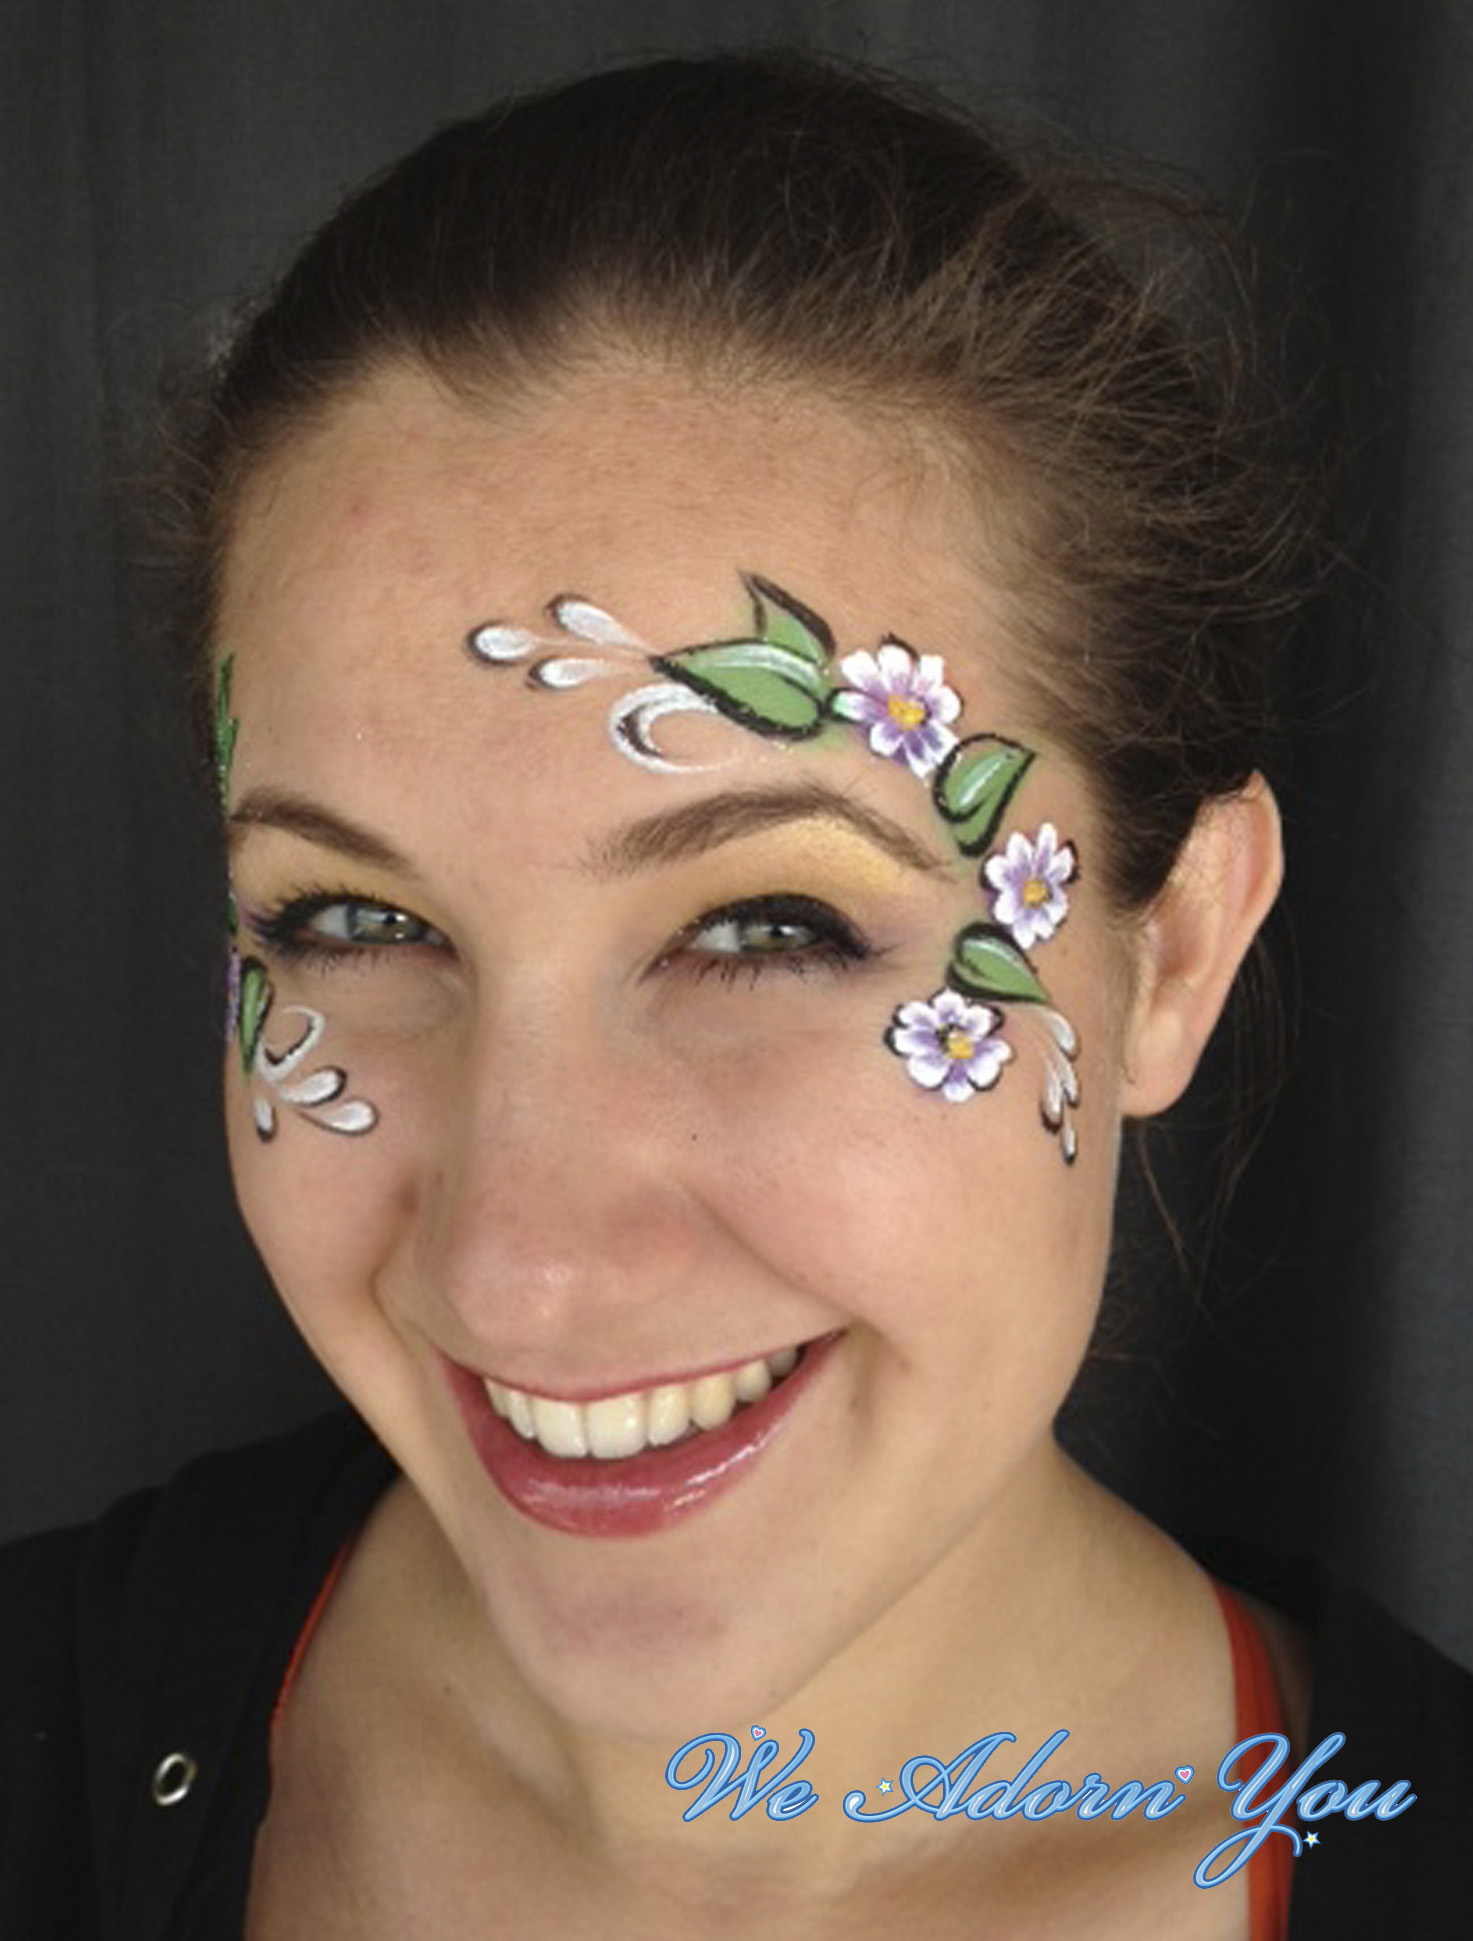 Face Painting Floral - We Adorn You.jpg